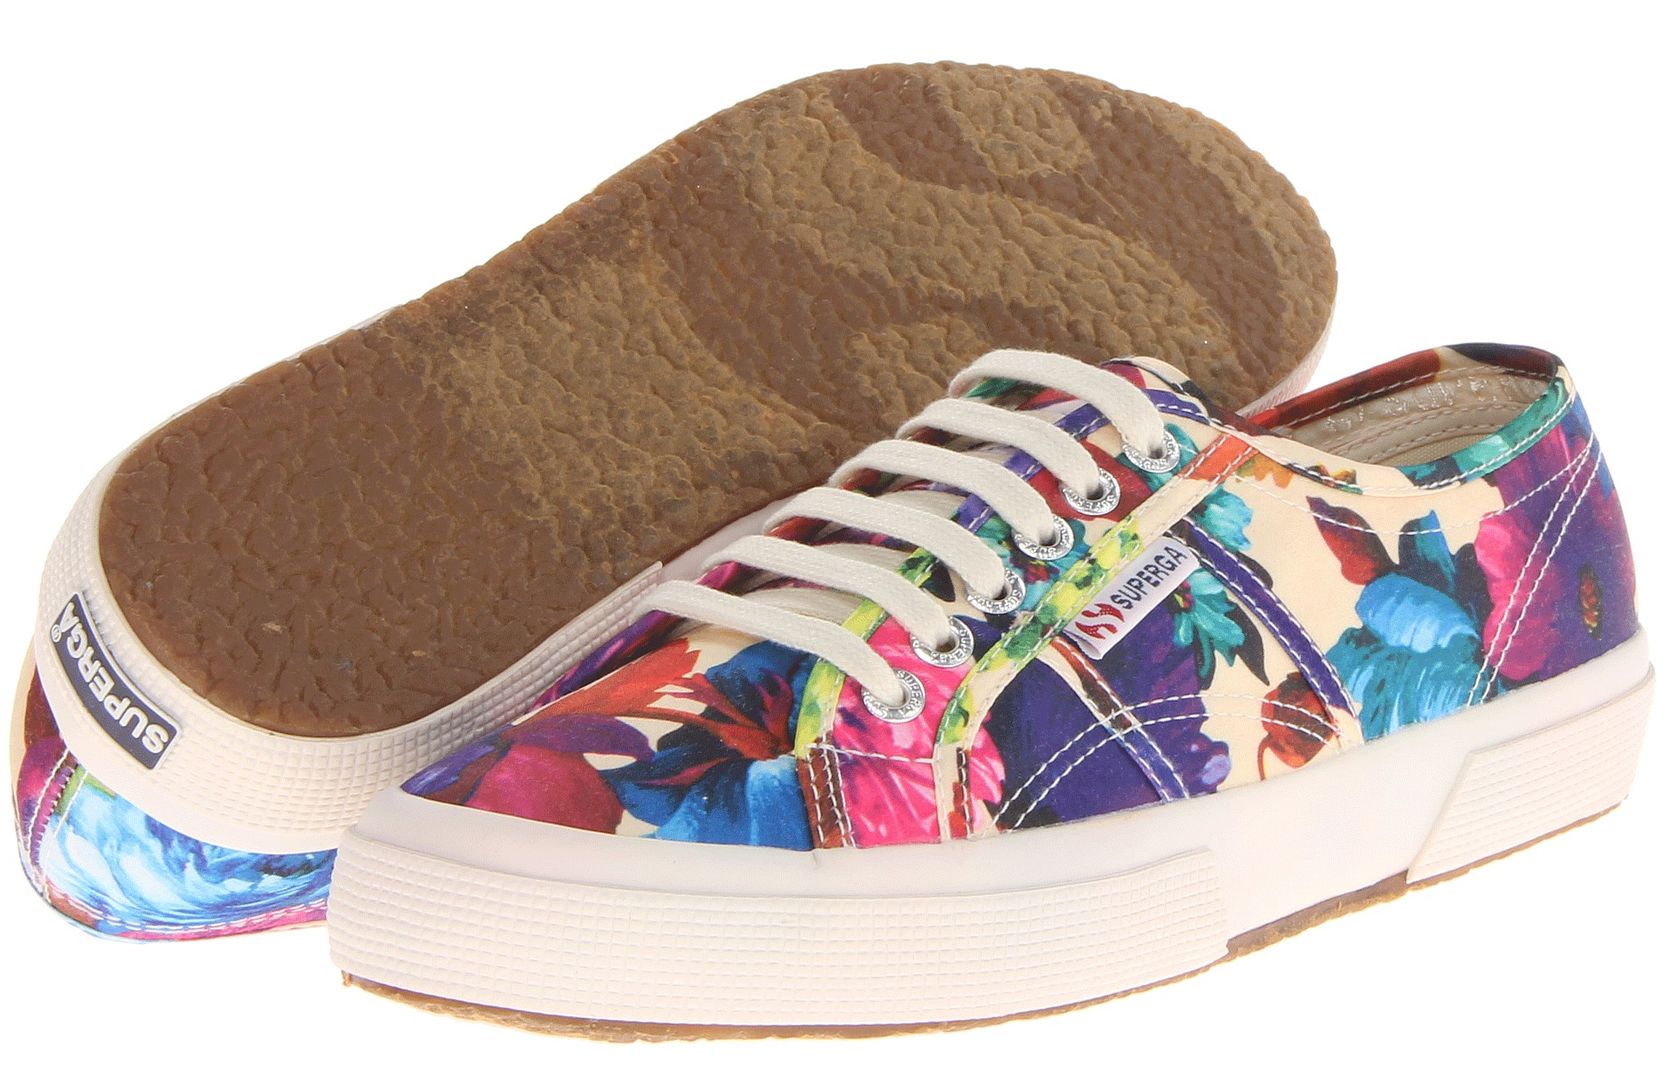 Floral Accessories: Floral print Superga sneakers at Zappos 